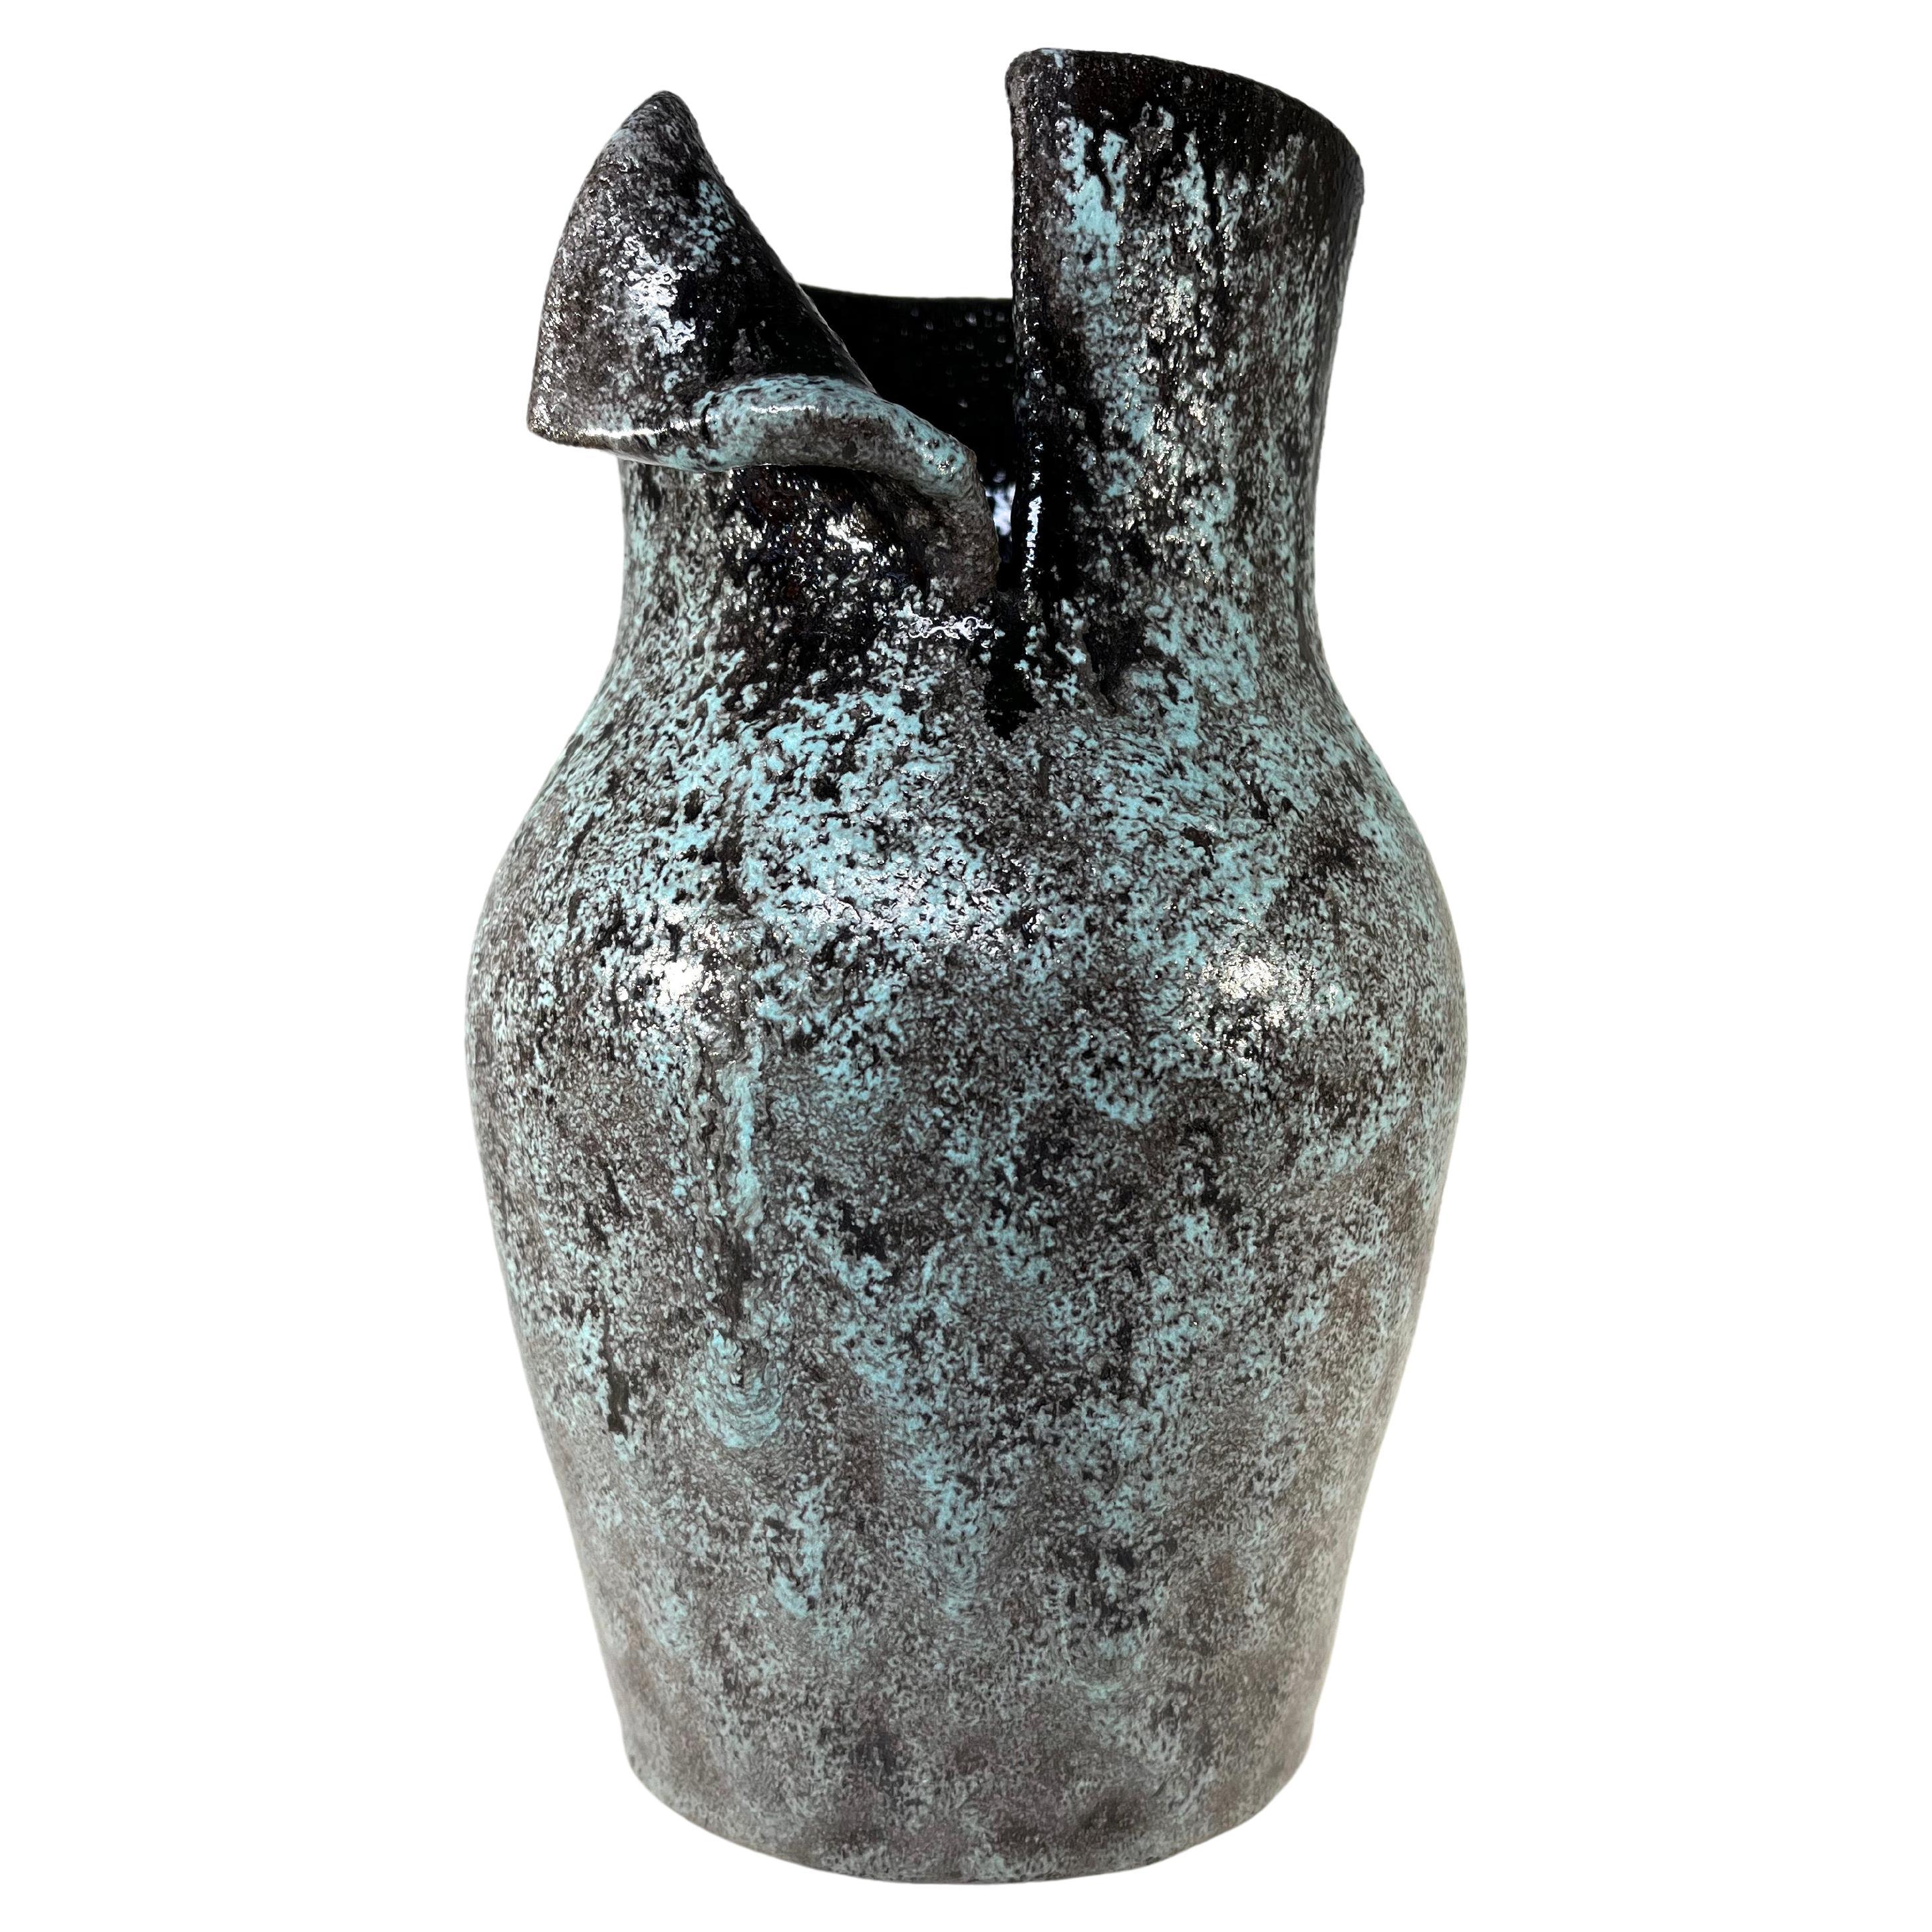 Powerful, Torn Fold Ceramic Vase By Accolay, France 1960's